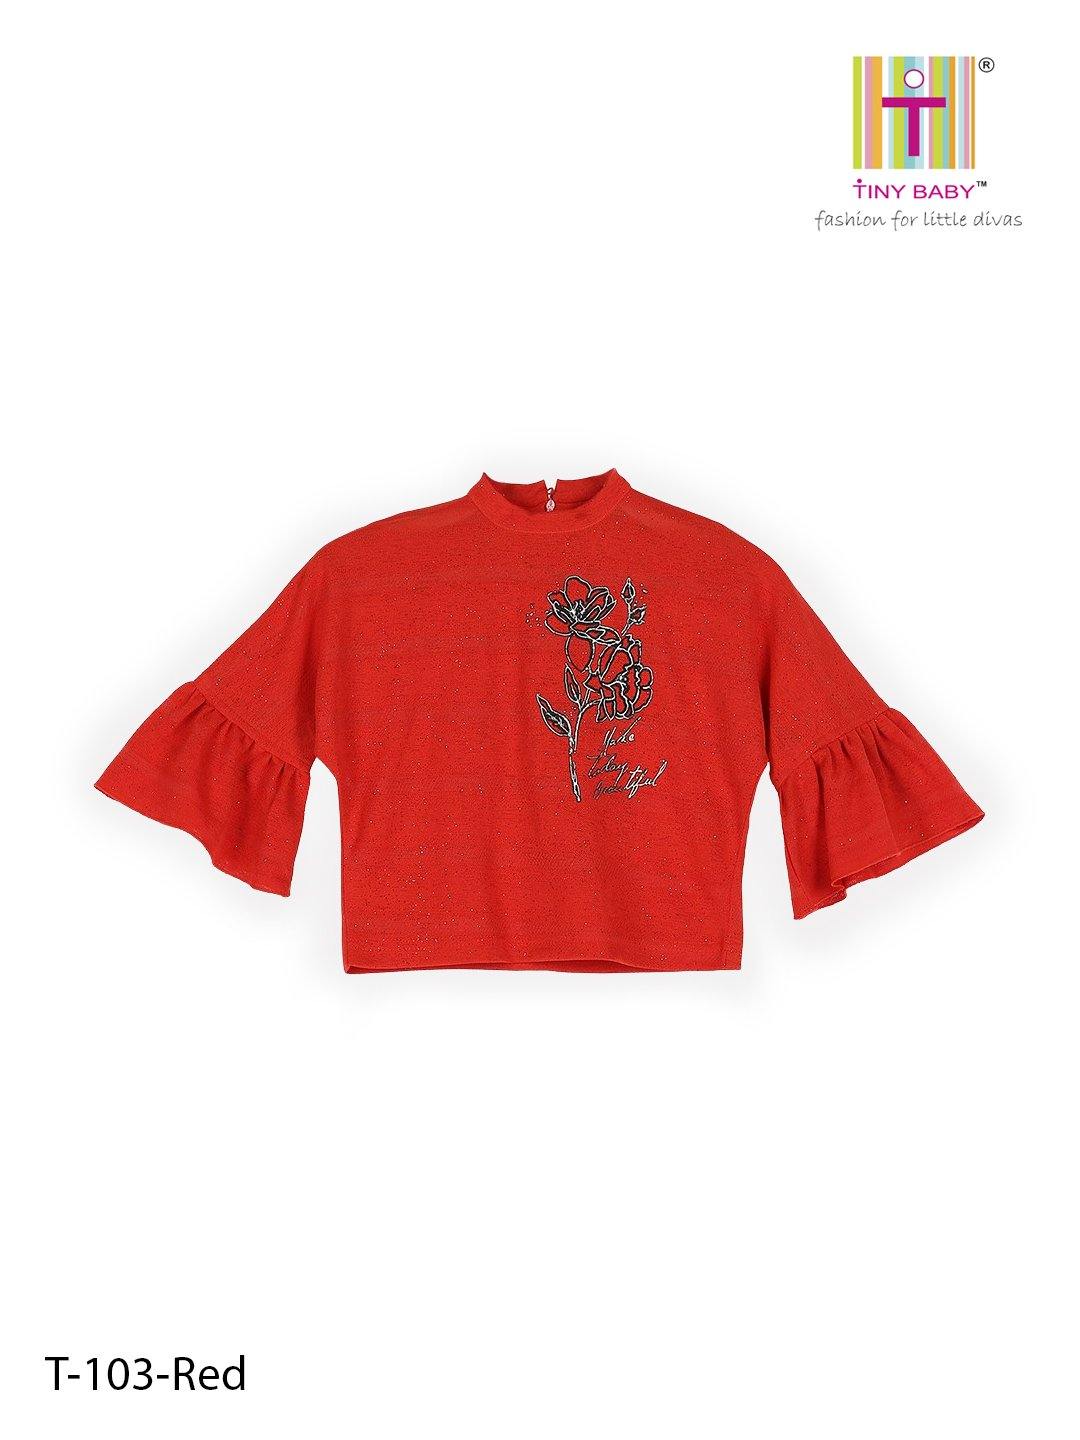 Tiny Baby Red Colored Top T-103-Red - TINY BABY INDIA shop.tinybaby.in